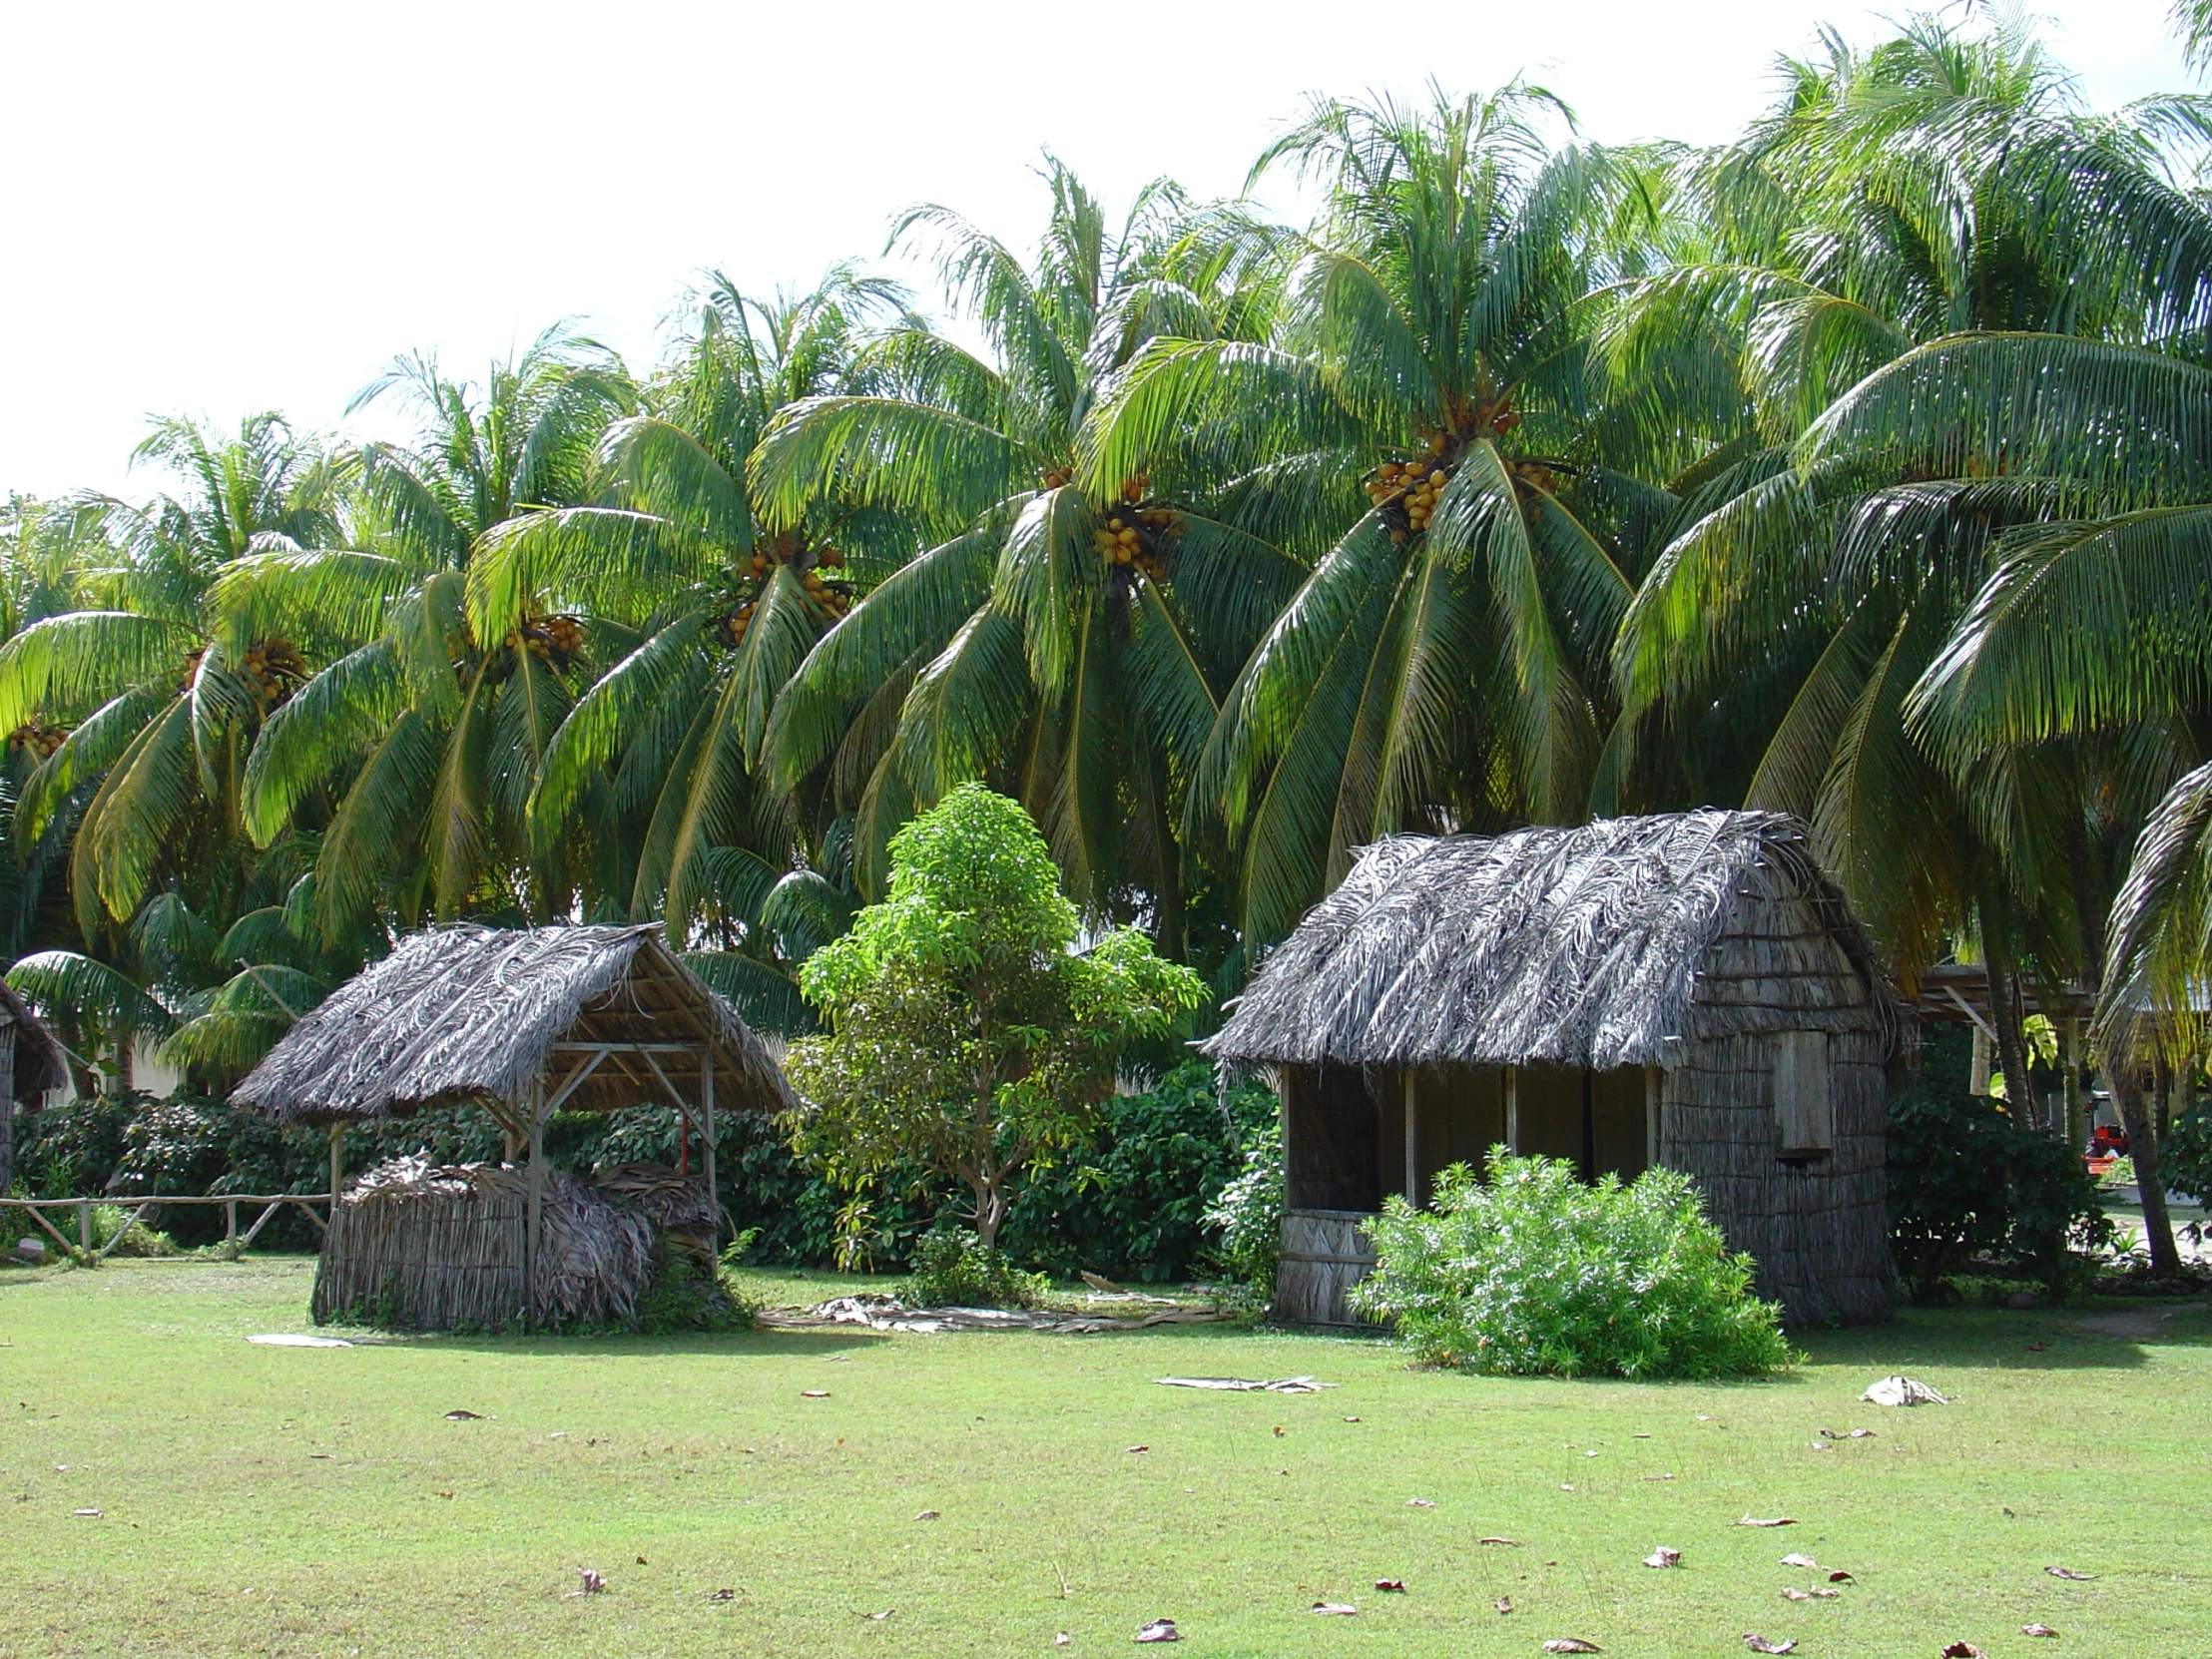 a group of huts sit on the green grass